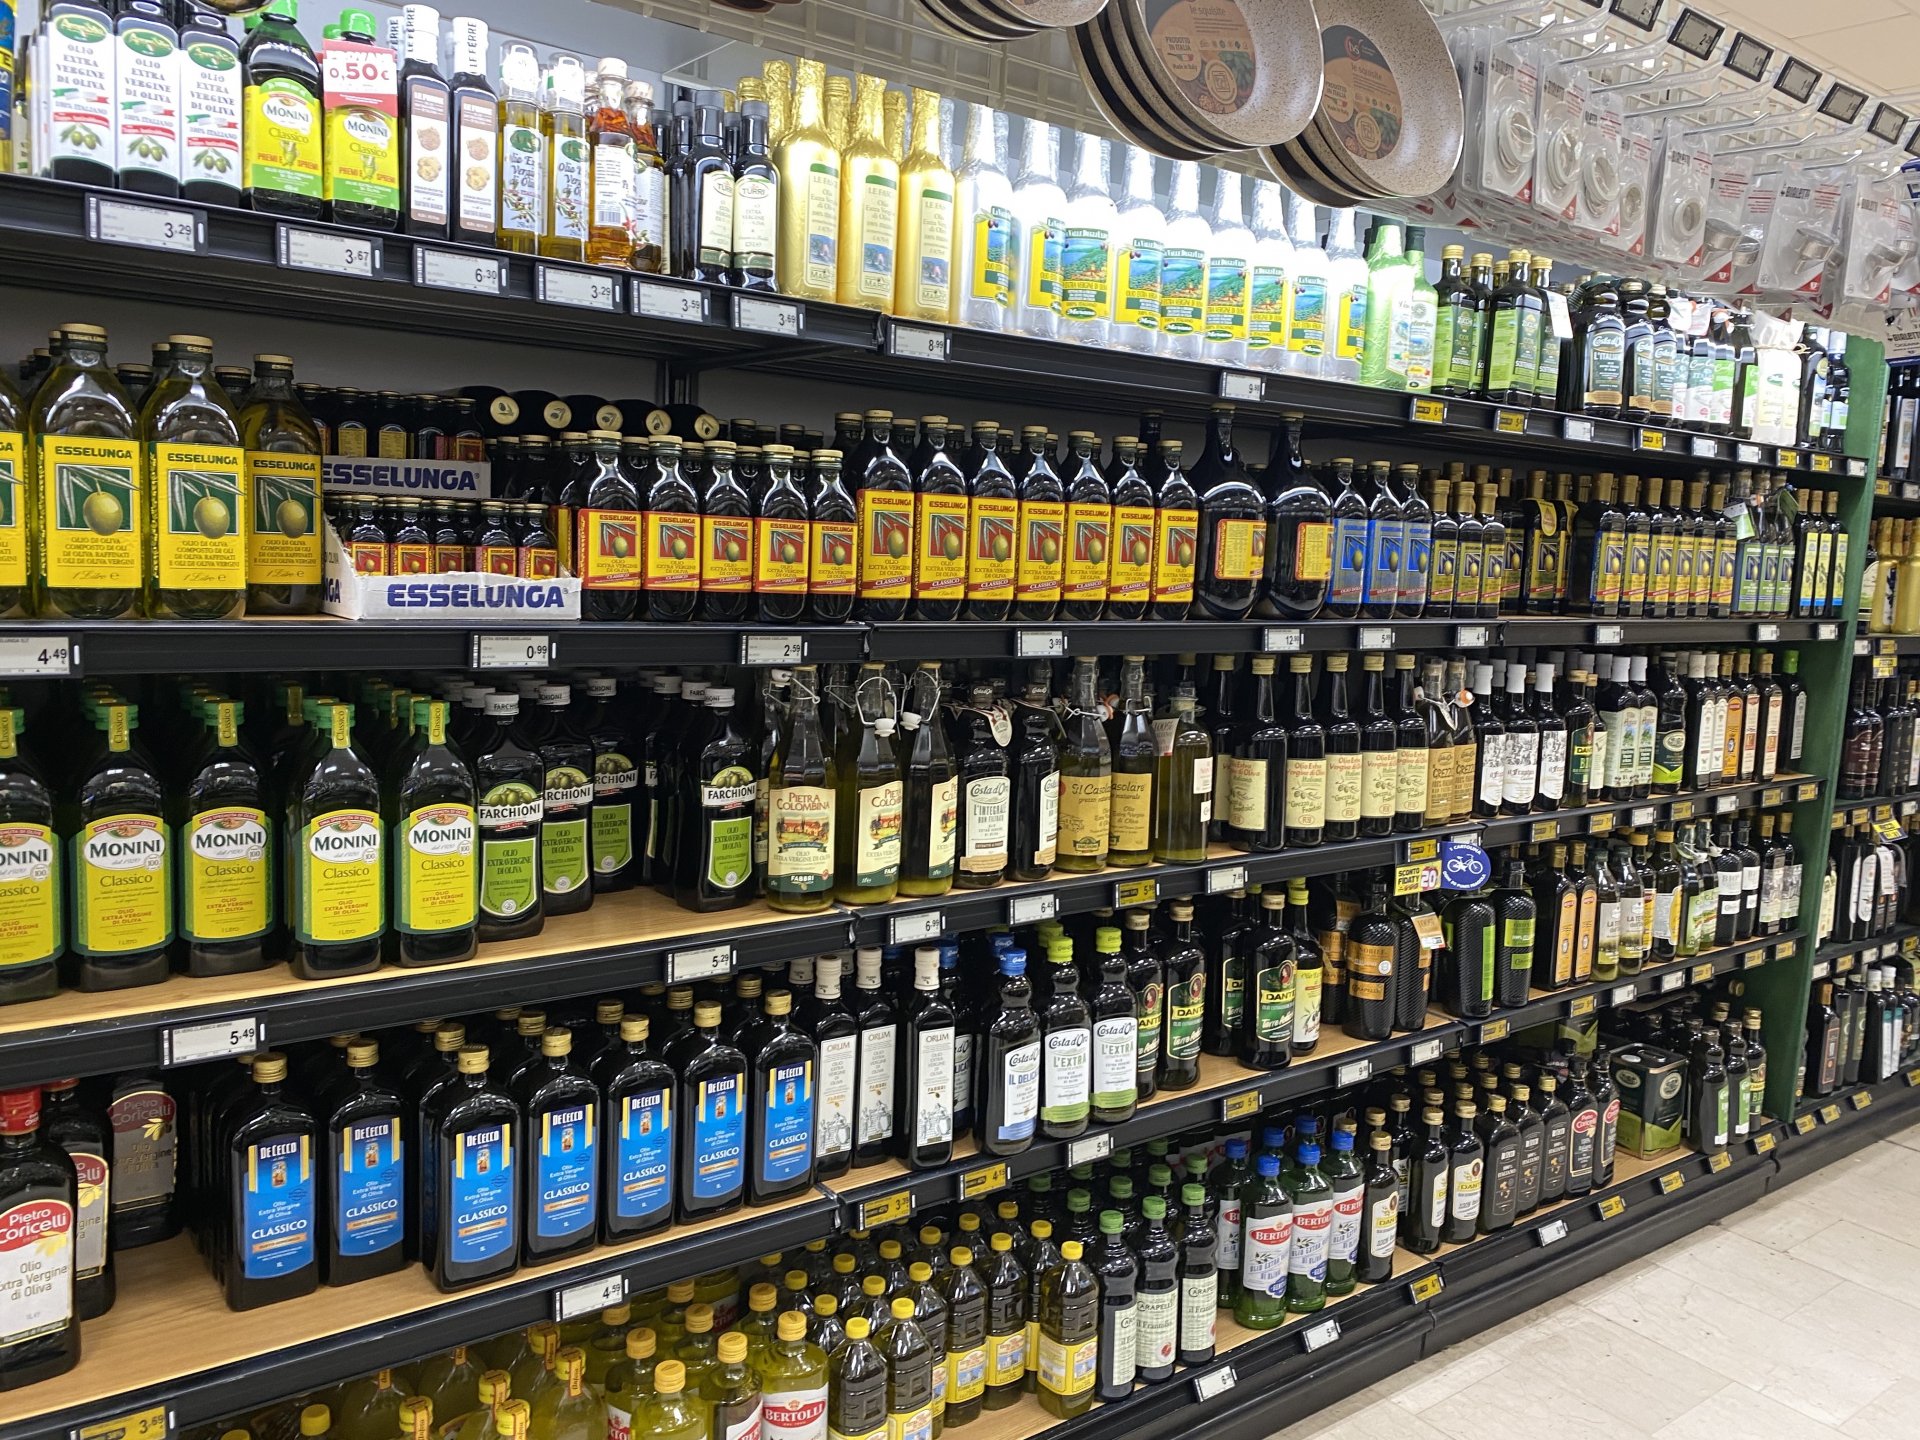 Olive Oil stocked in Italy. Update of 28 February 2021